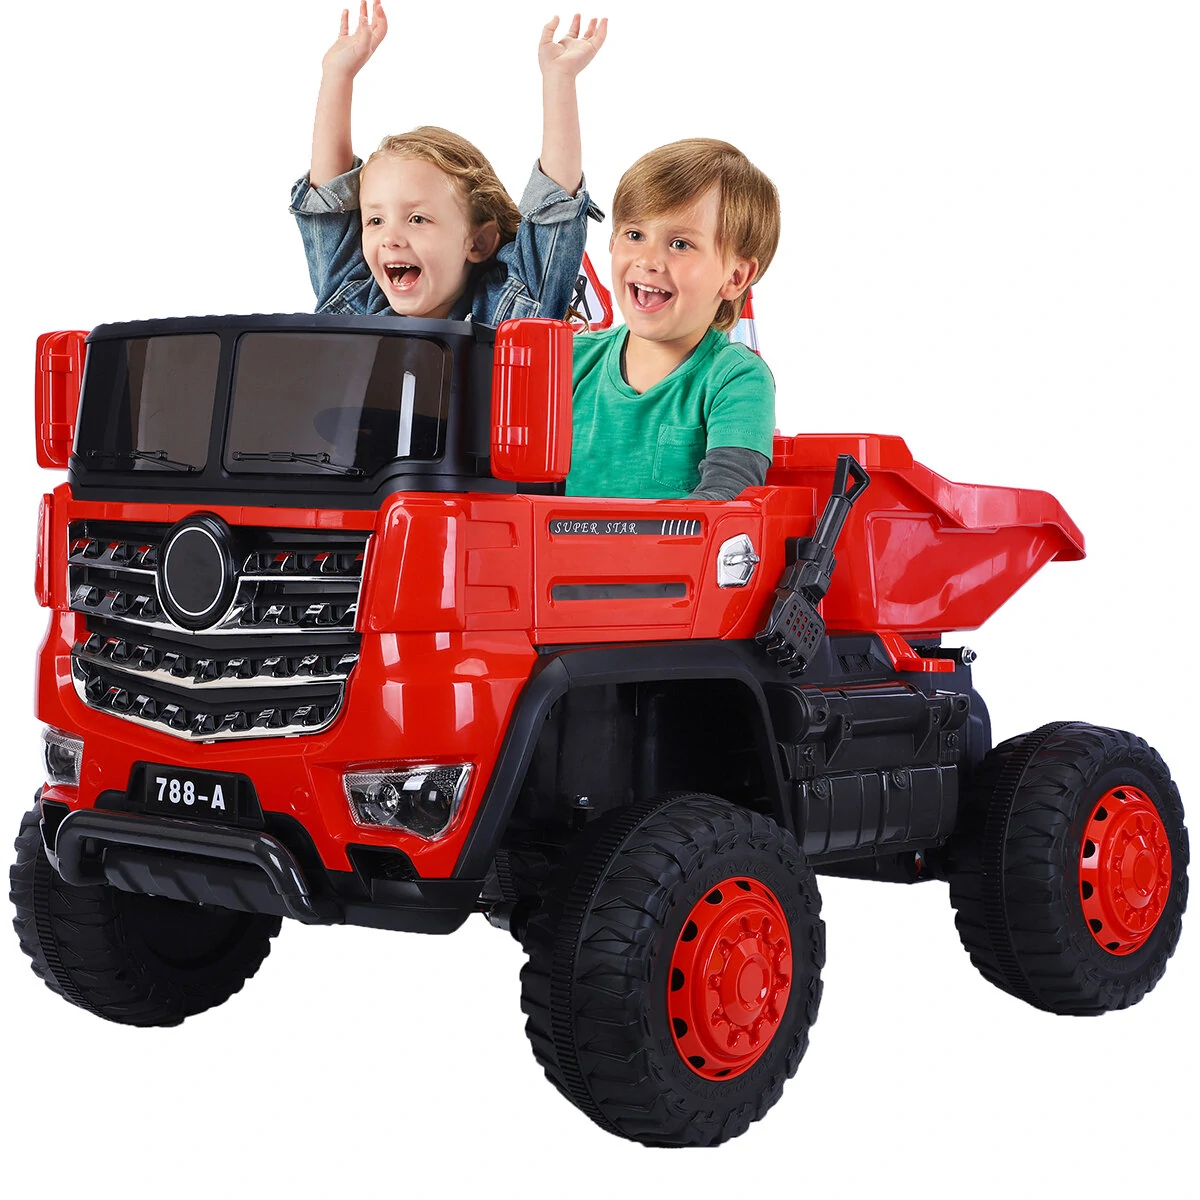 788-a 4wd 2 seater ride on for kids electric car 390 motor plus 12.10 battery powered four-wheel drive engineering vehicle ride on toy cars